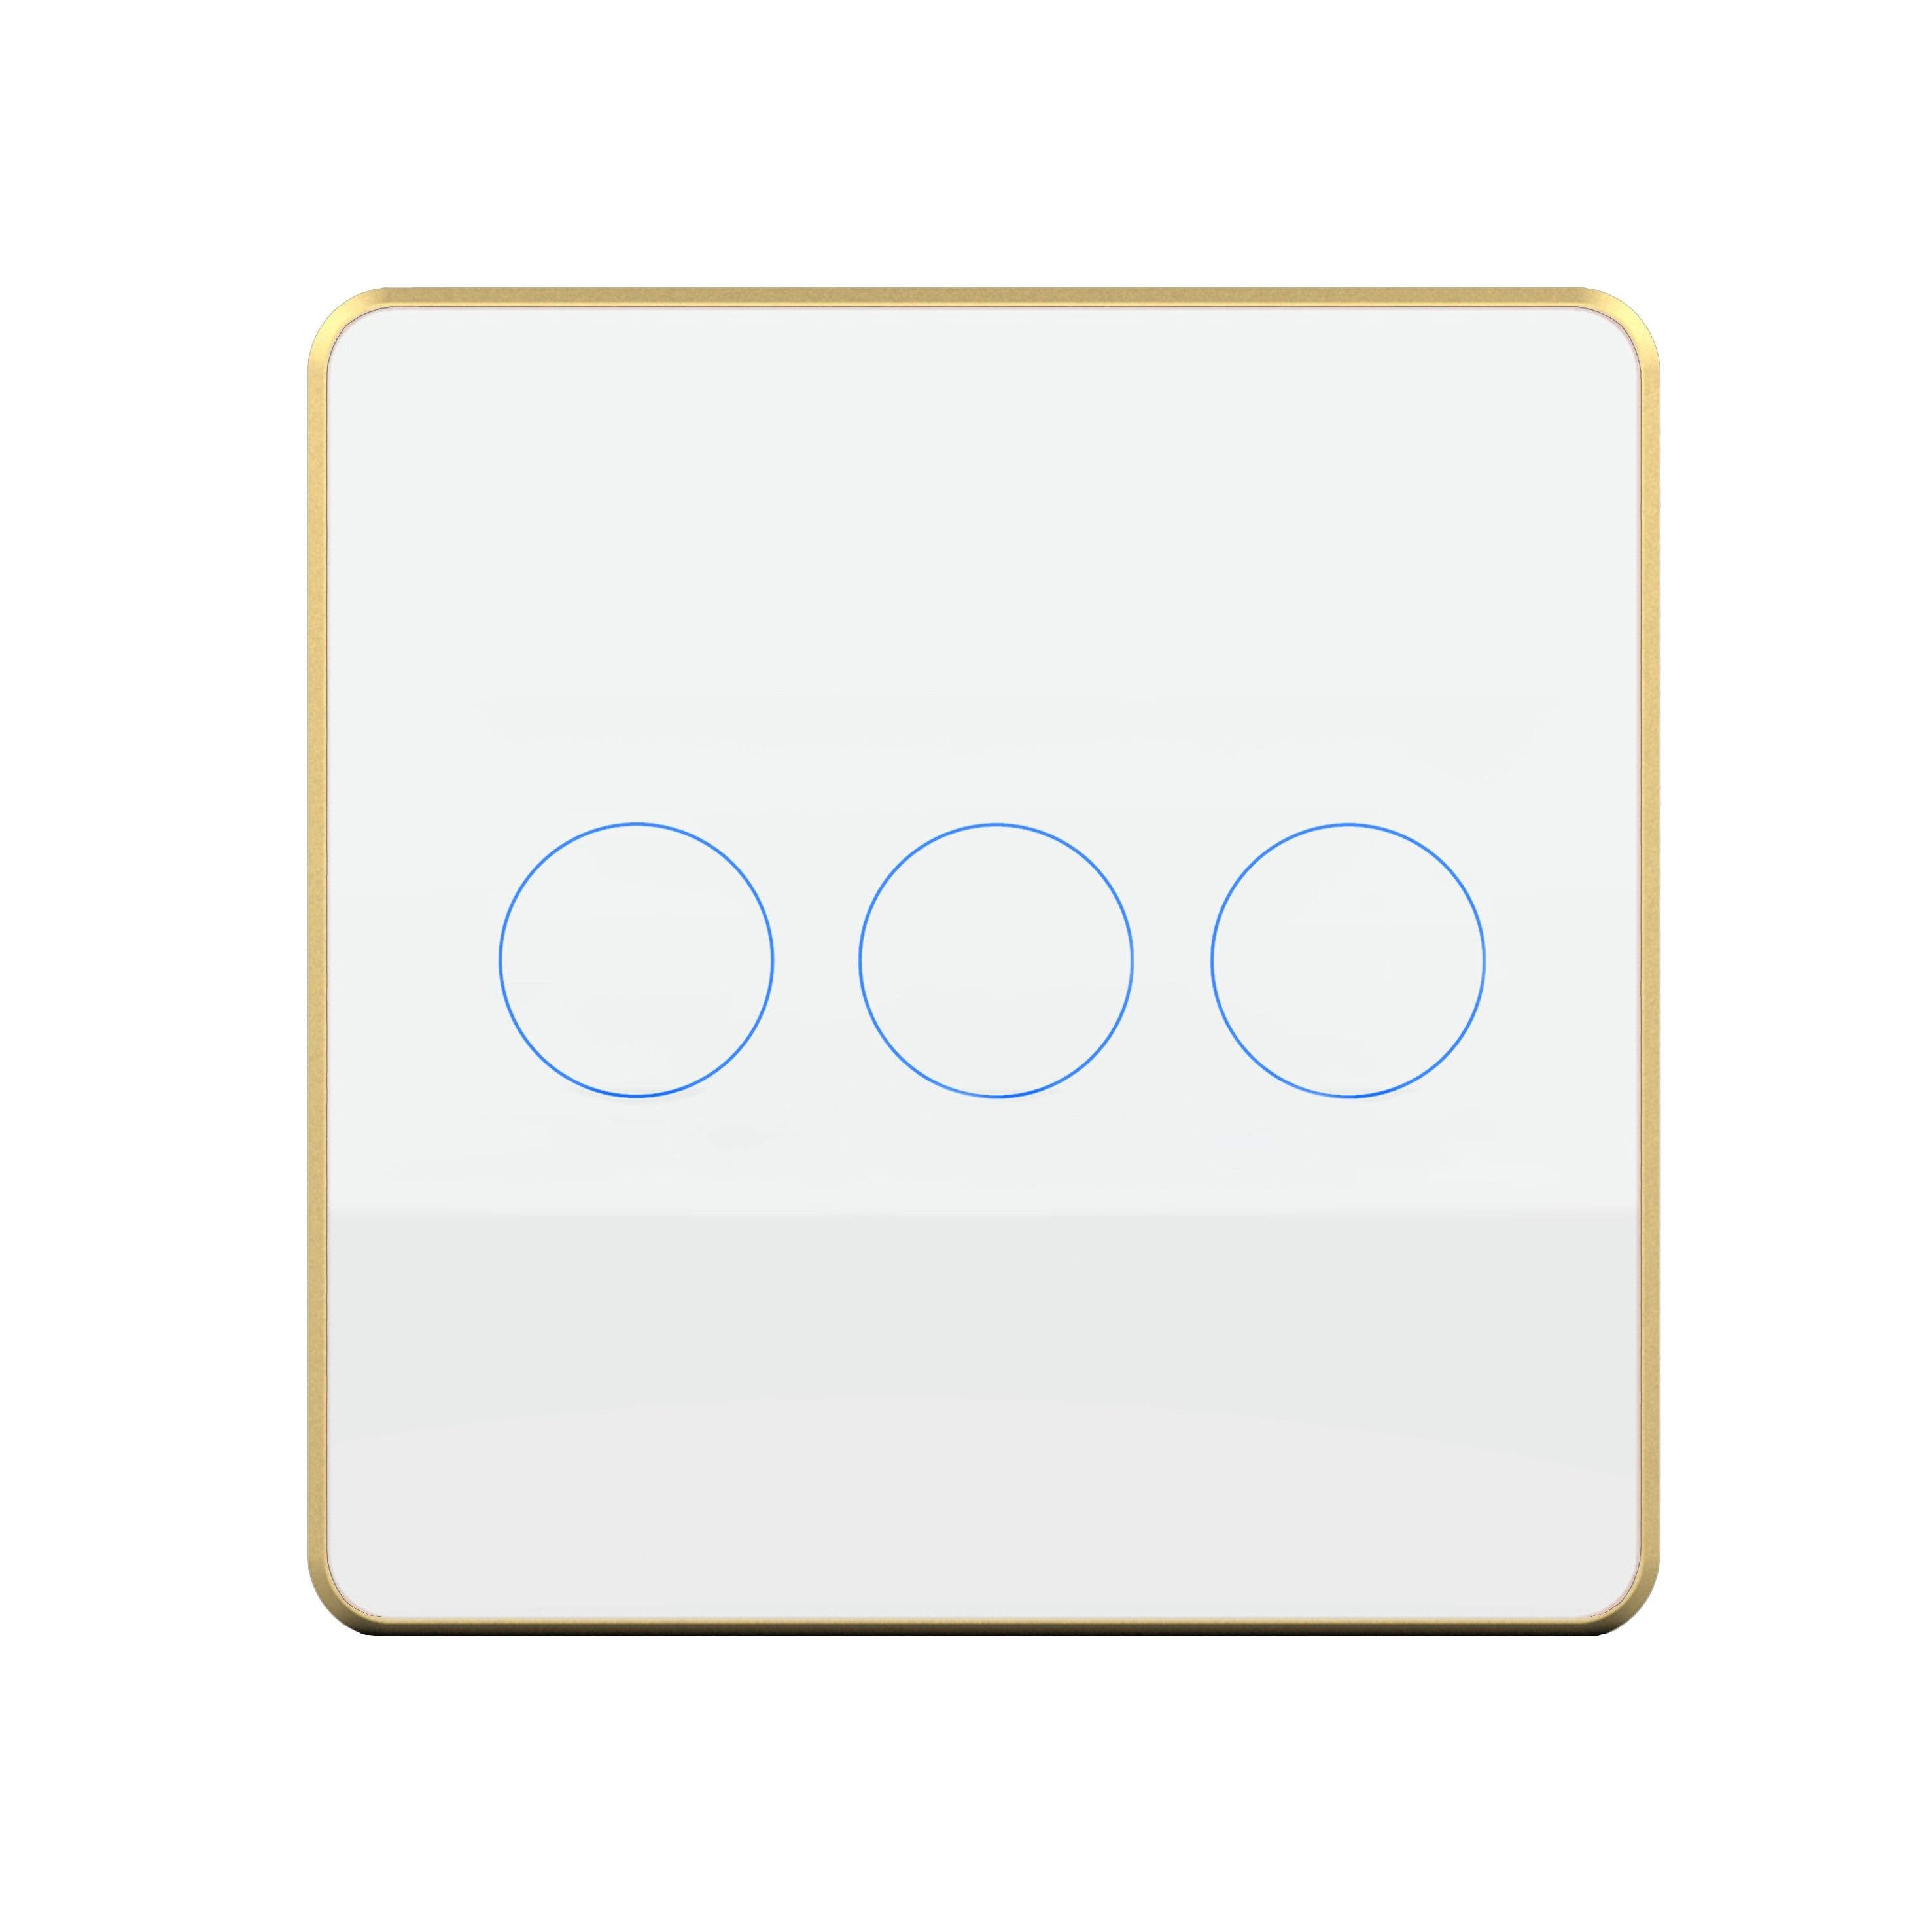 HOGAR SMART THREE TOUCH SWITCH PANLES WITH BUILT-IN AUTOMATION - Ankur Lighting